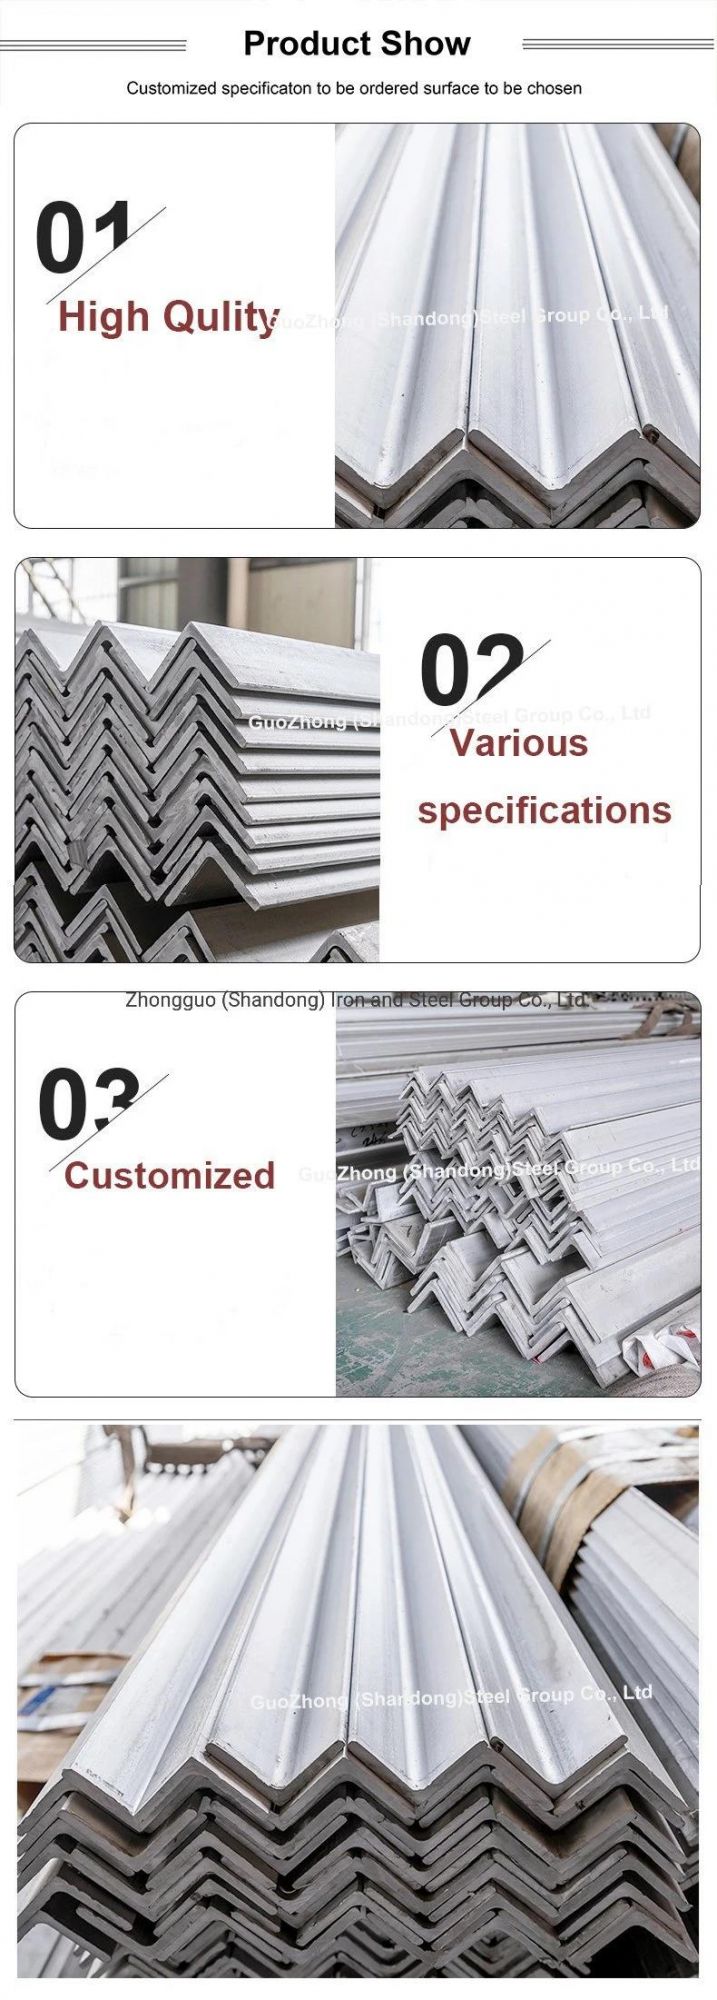 Thickness 2mm 3mm 5mm Stainless Steel Angle Guozhong Hot Rolled Stainless Steel Angle for Sale